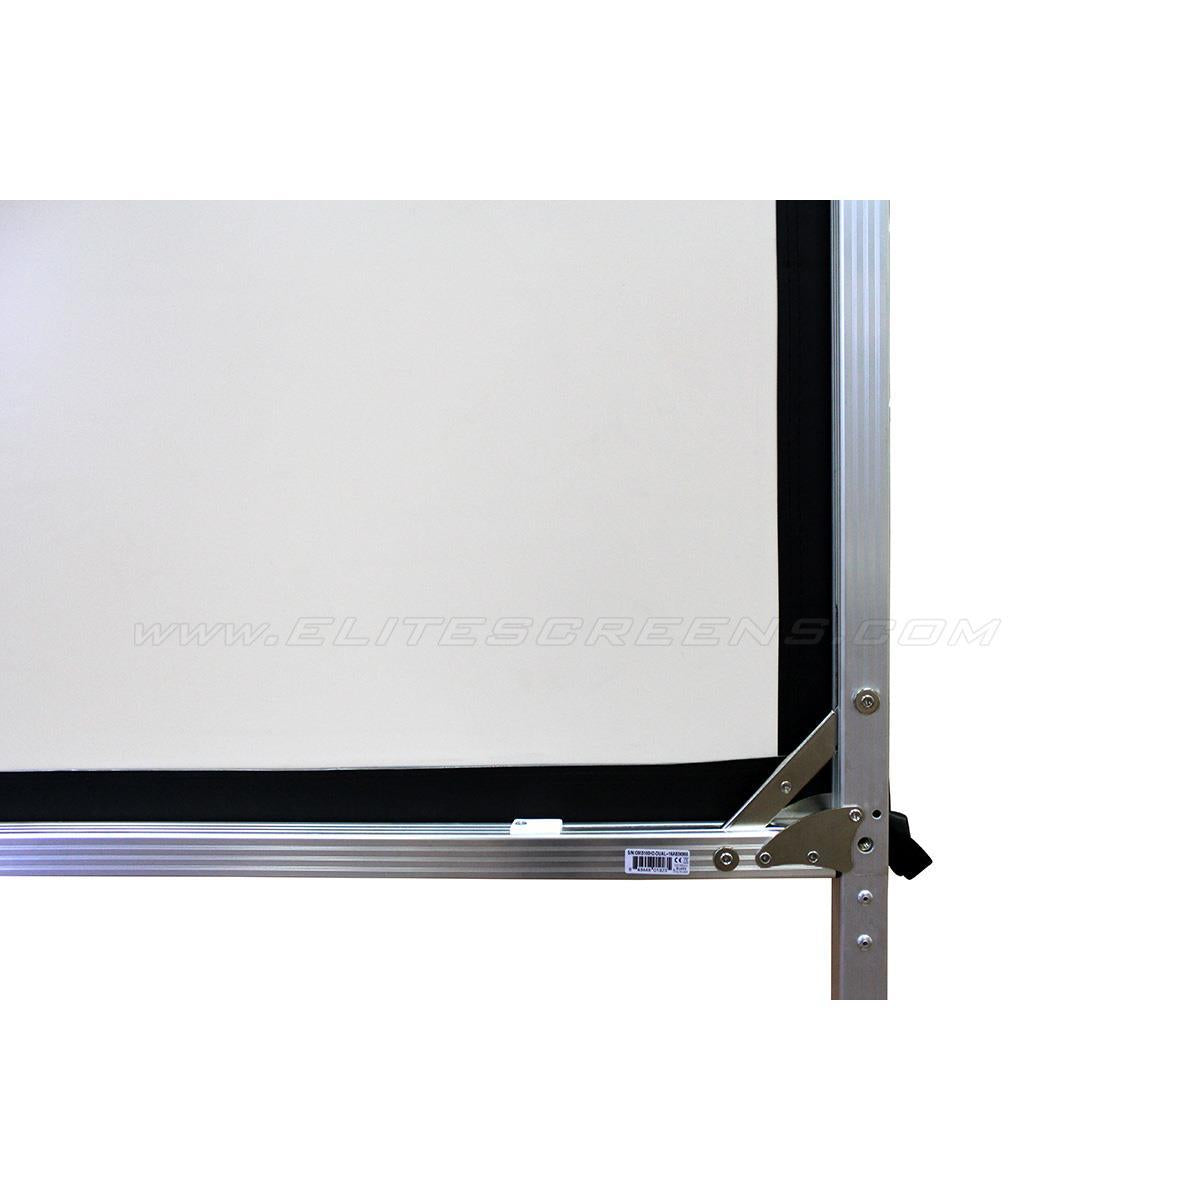 Elite Screens Yard Master 2 Dual Series Material, 120" Diag. 16:9, Indoor/ Outdoor Movie Theater Dual-FRONT and REAR Projector Screen Material